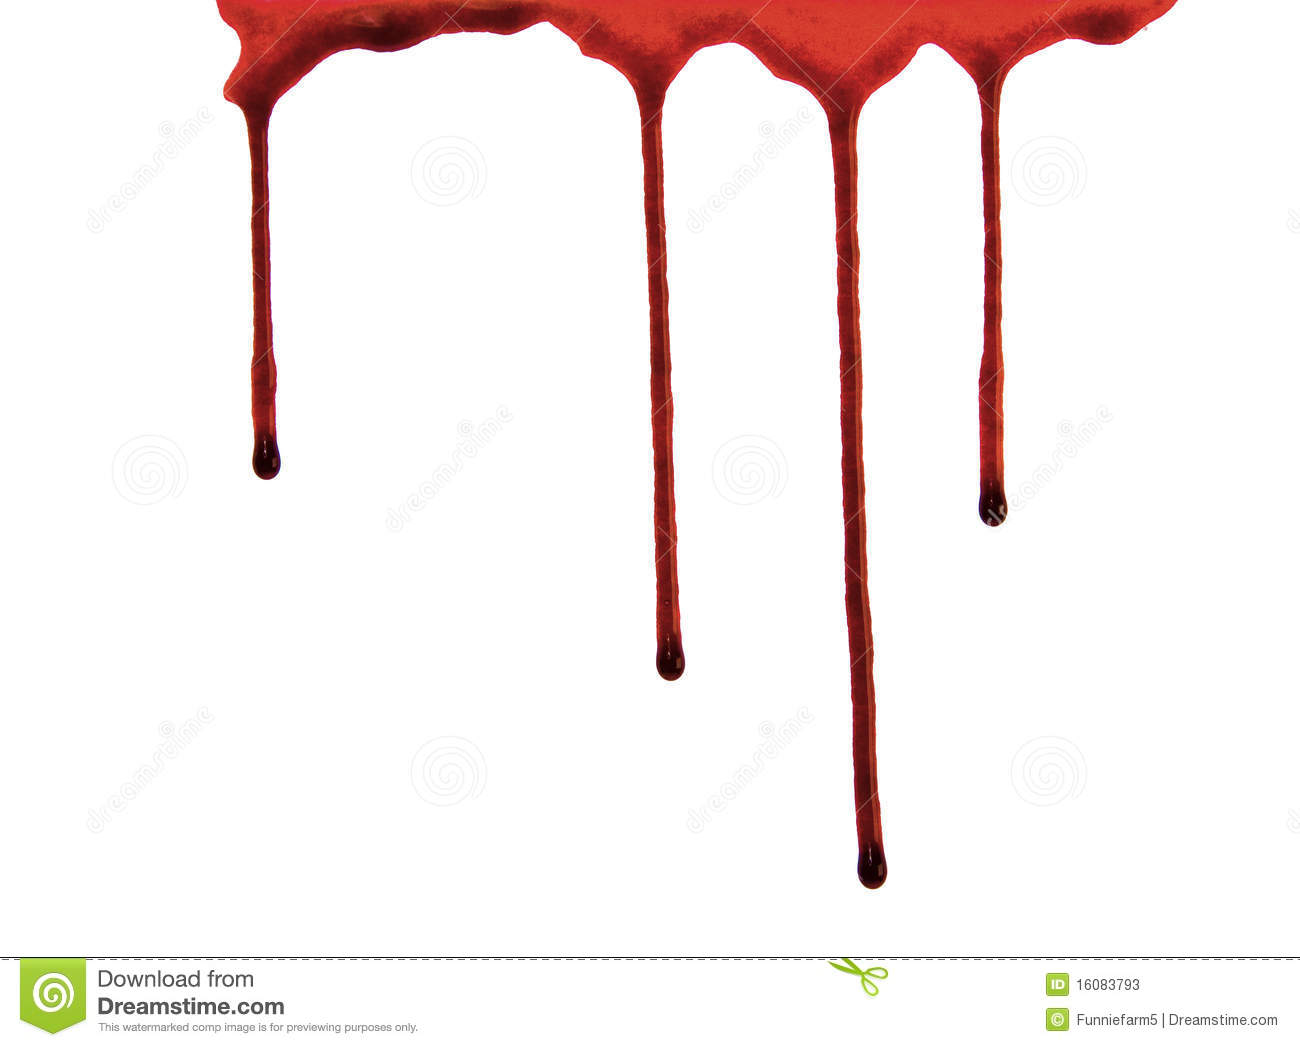 Dripping Blood Stock Photos   Image  16083793